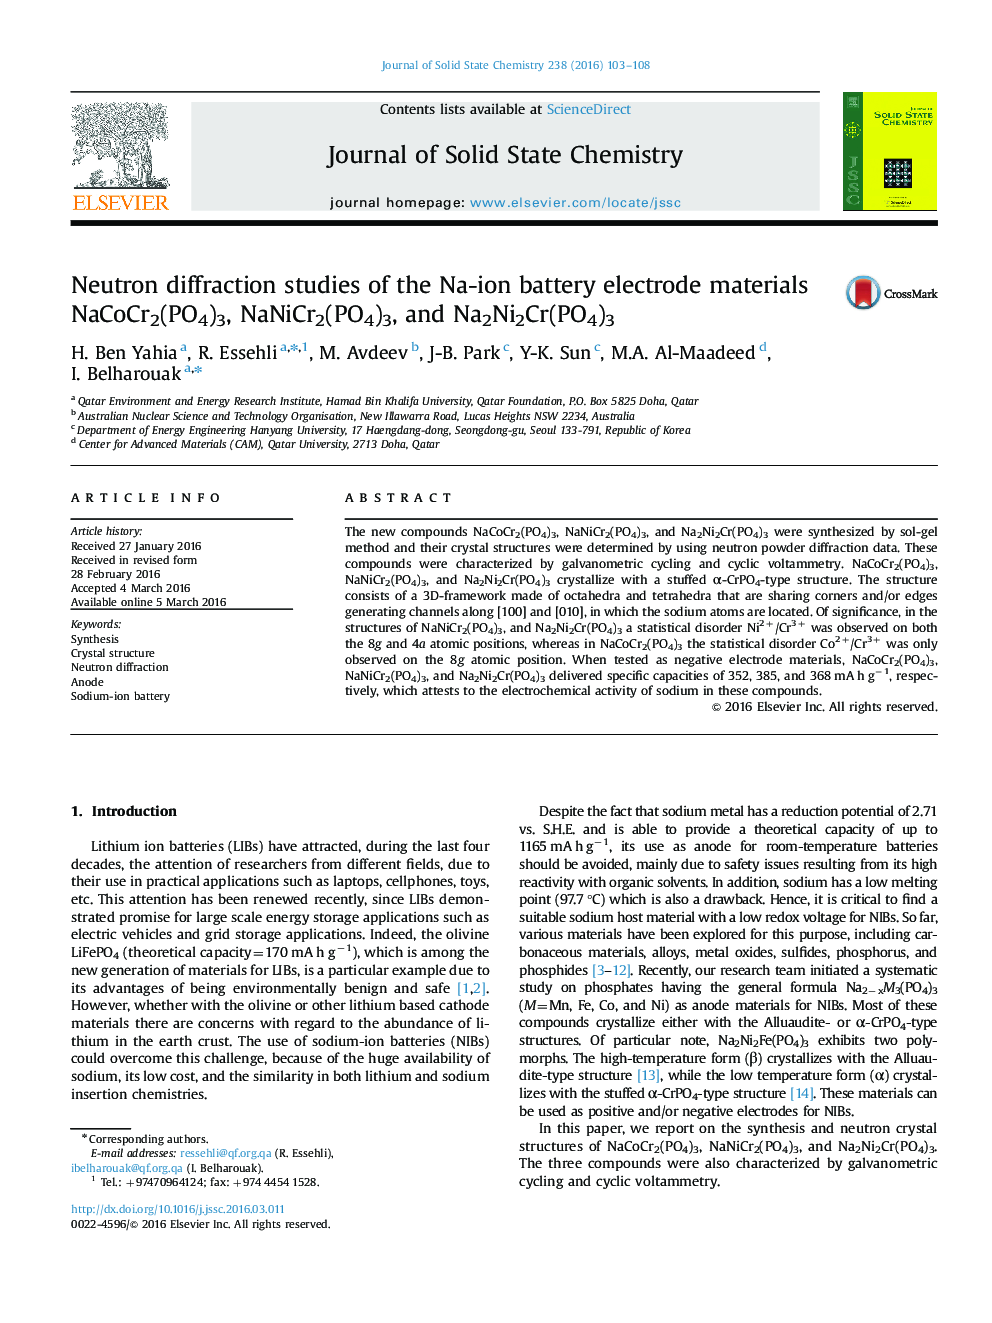 Neutron diffraction studies of the Na-ion battery electrode materials NaCoCr2(PO4)3, NaNiCr2(PO4)3, and Na2Ni2Cr(PO4)3